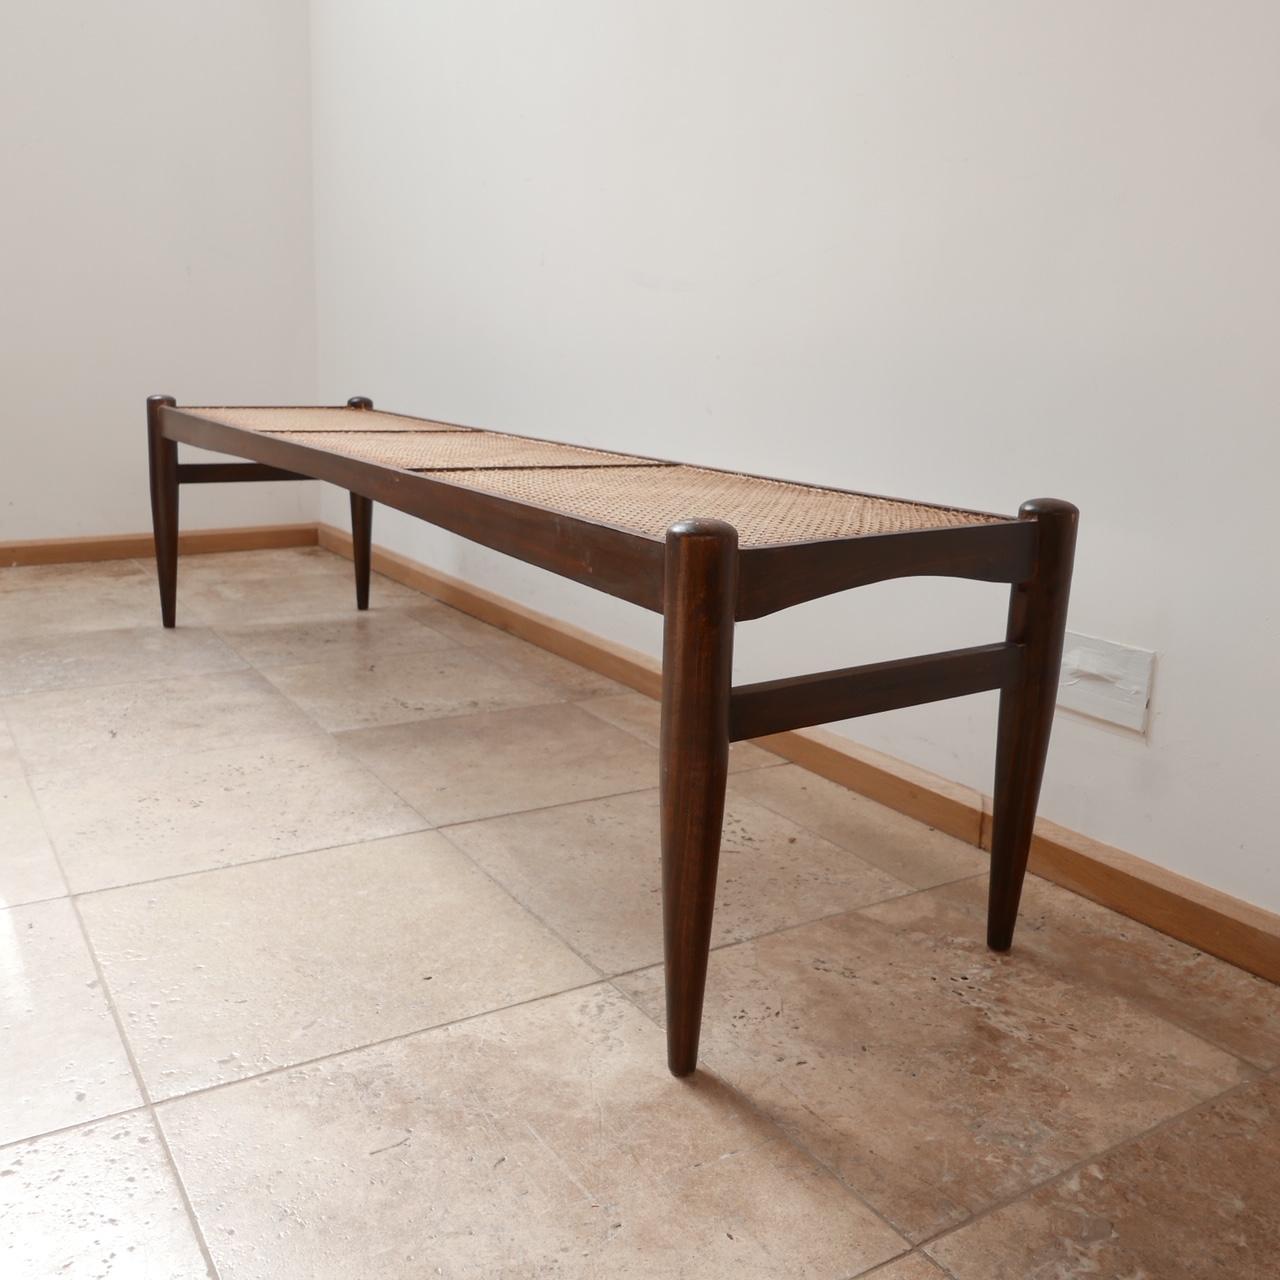 20th Century Swedish Mid-Century Long Cane Bench or Coffee Table